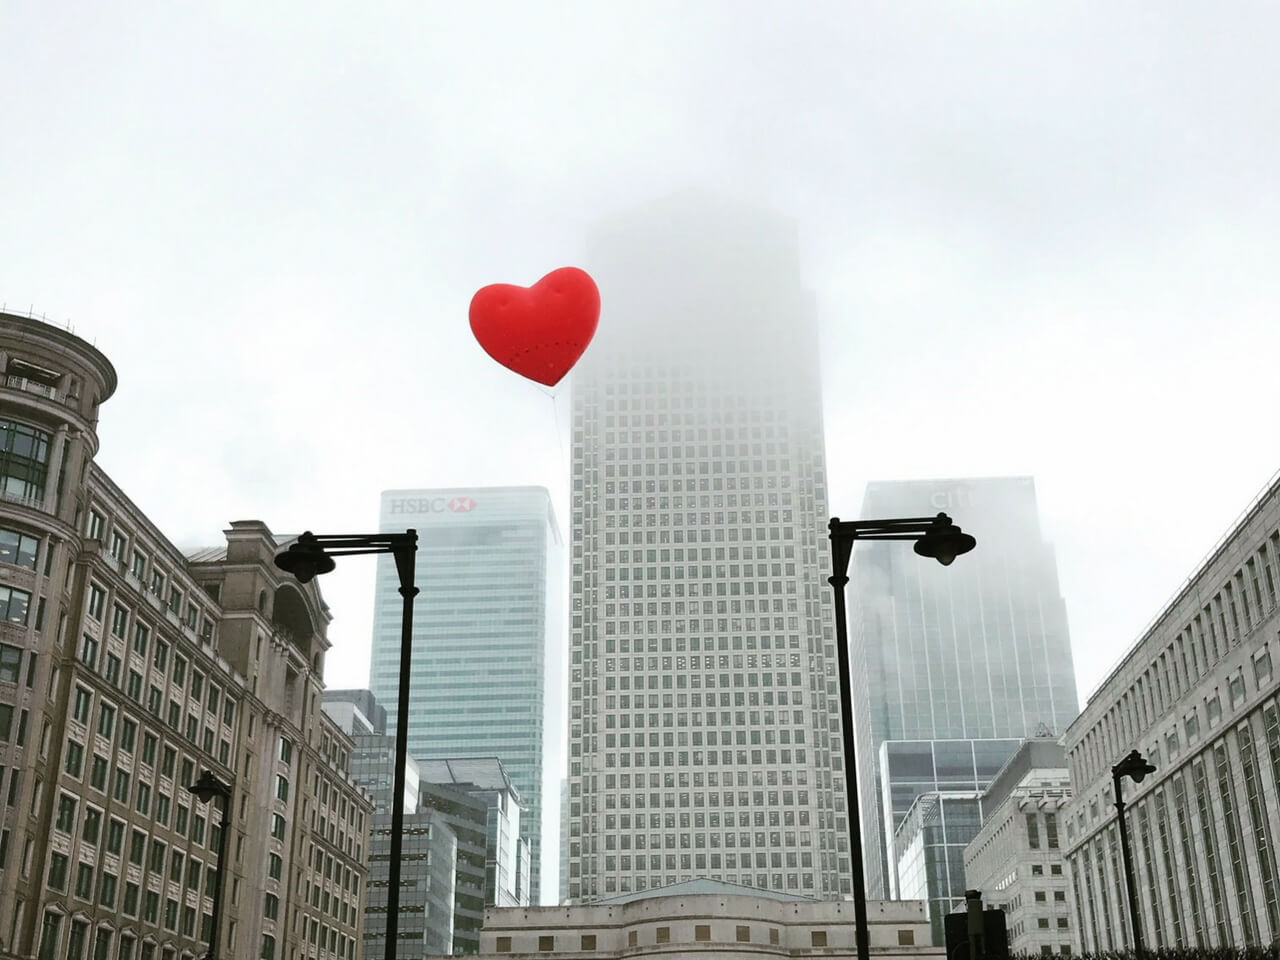 inflatable chubby heart by buildings